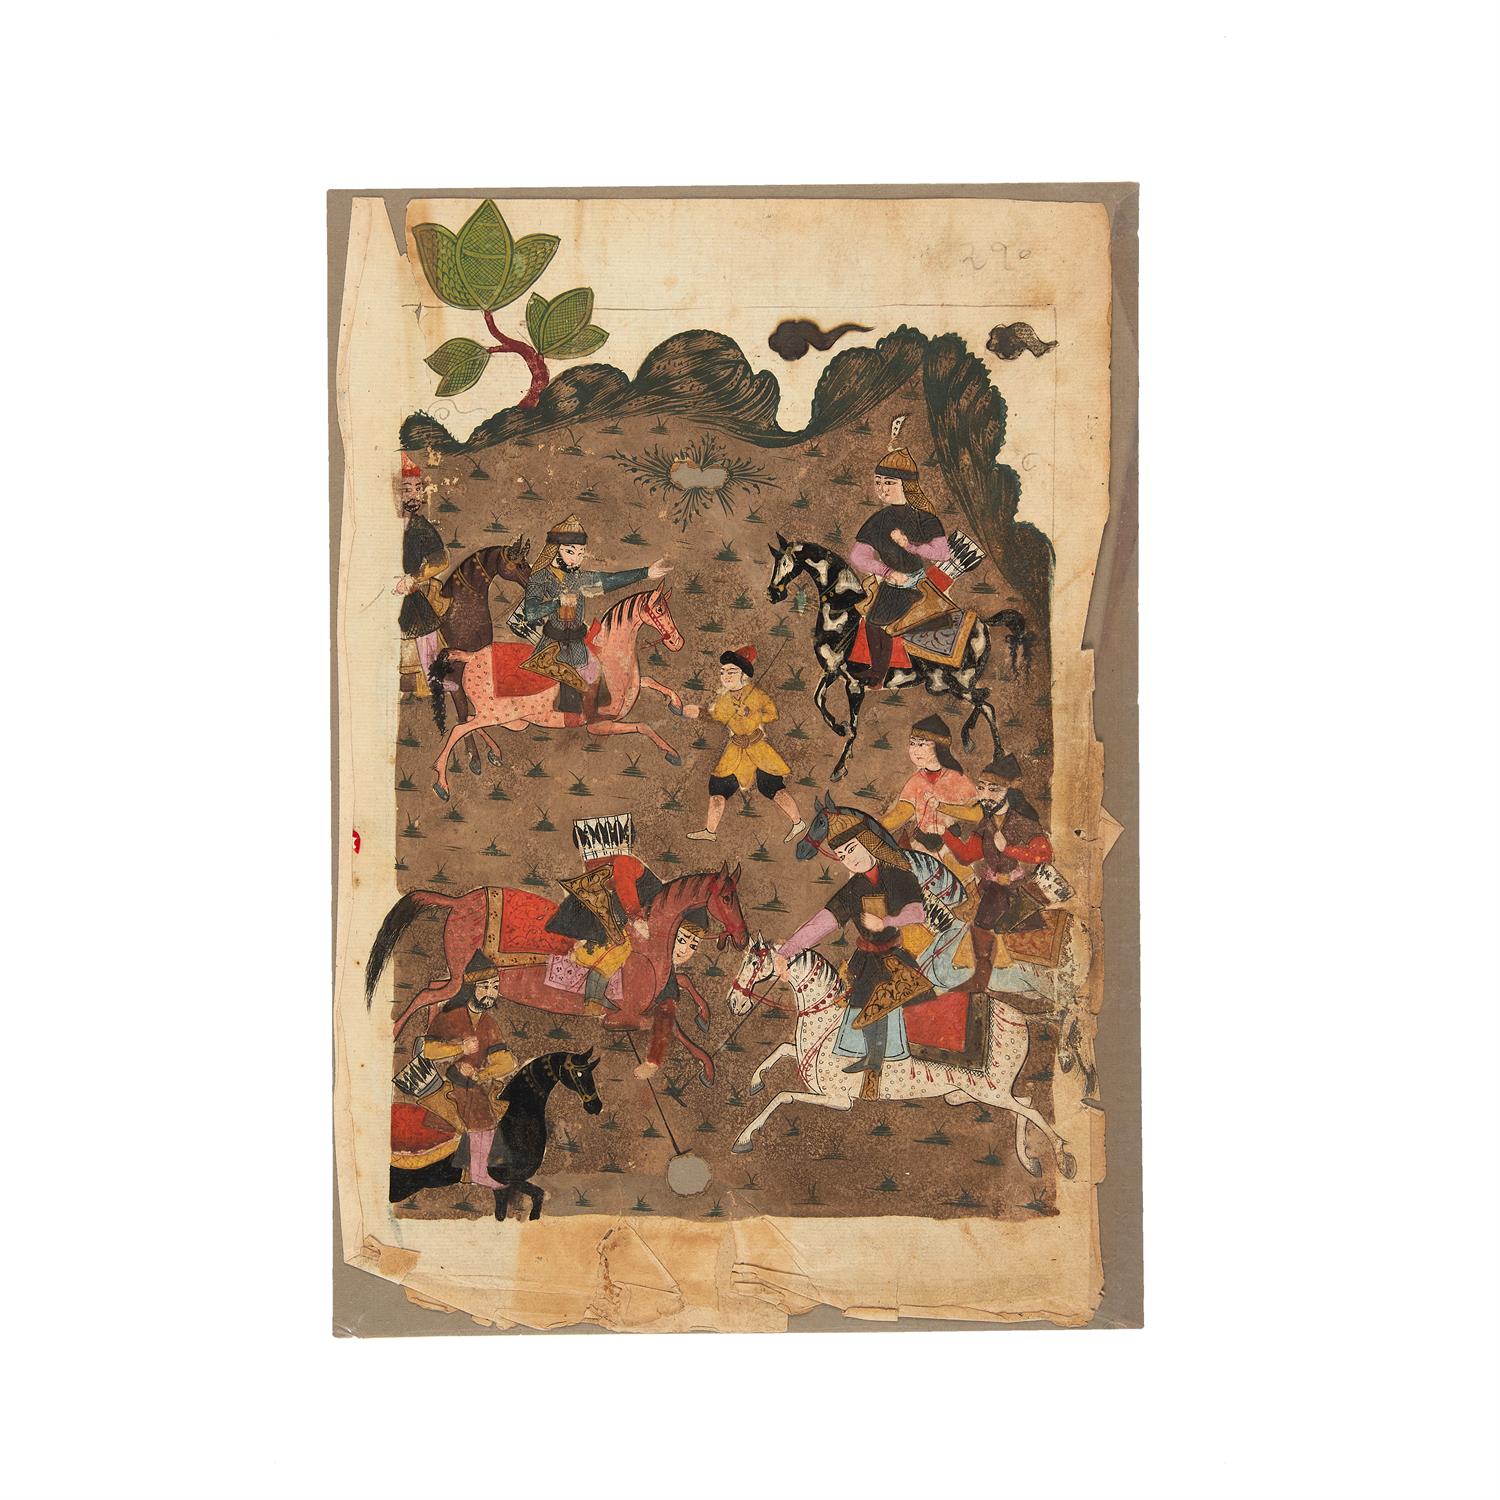 Three full-page illustrations from Shahnameh, miniatures on paper [India (Deccan), c. 1700] - Image 3 of 3